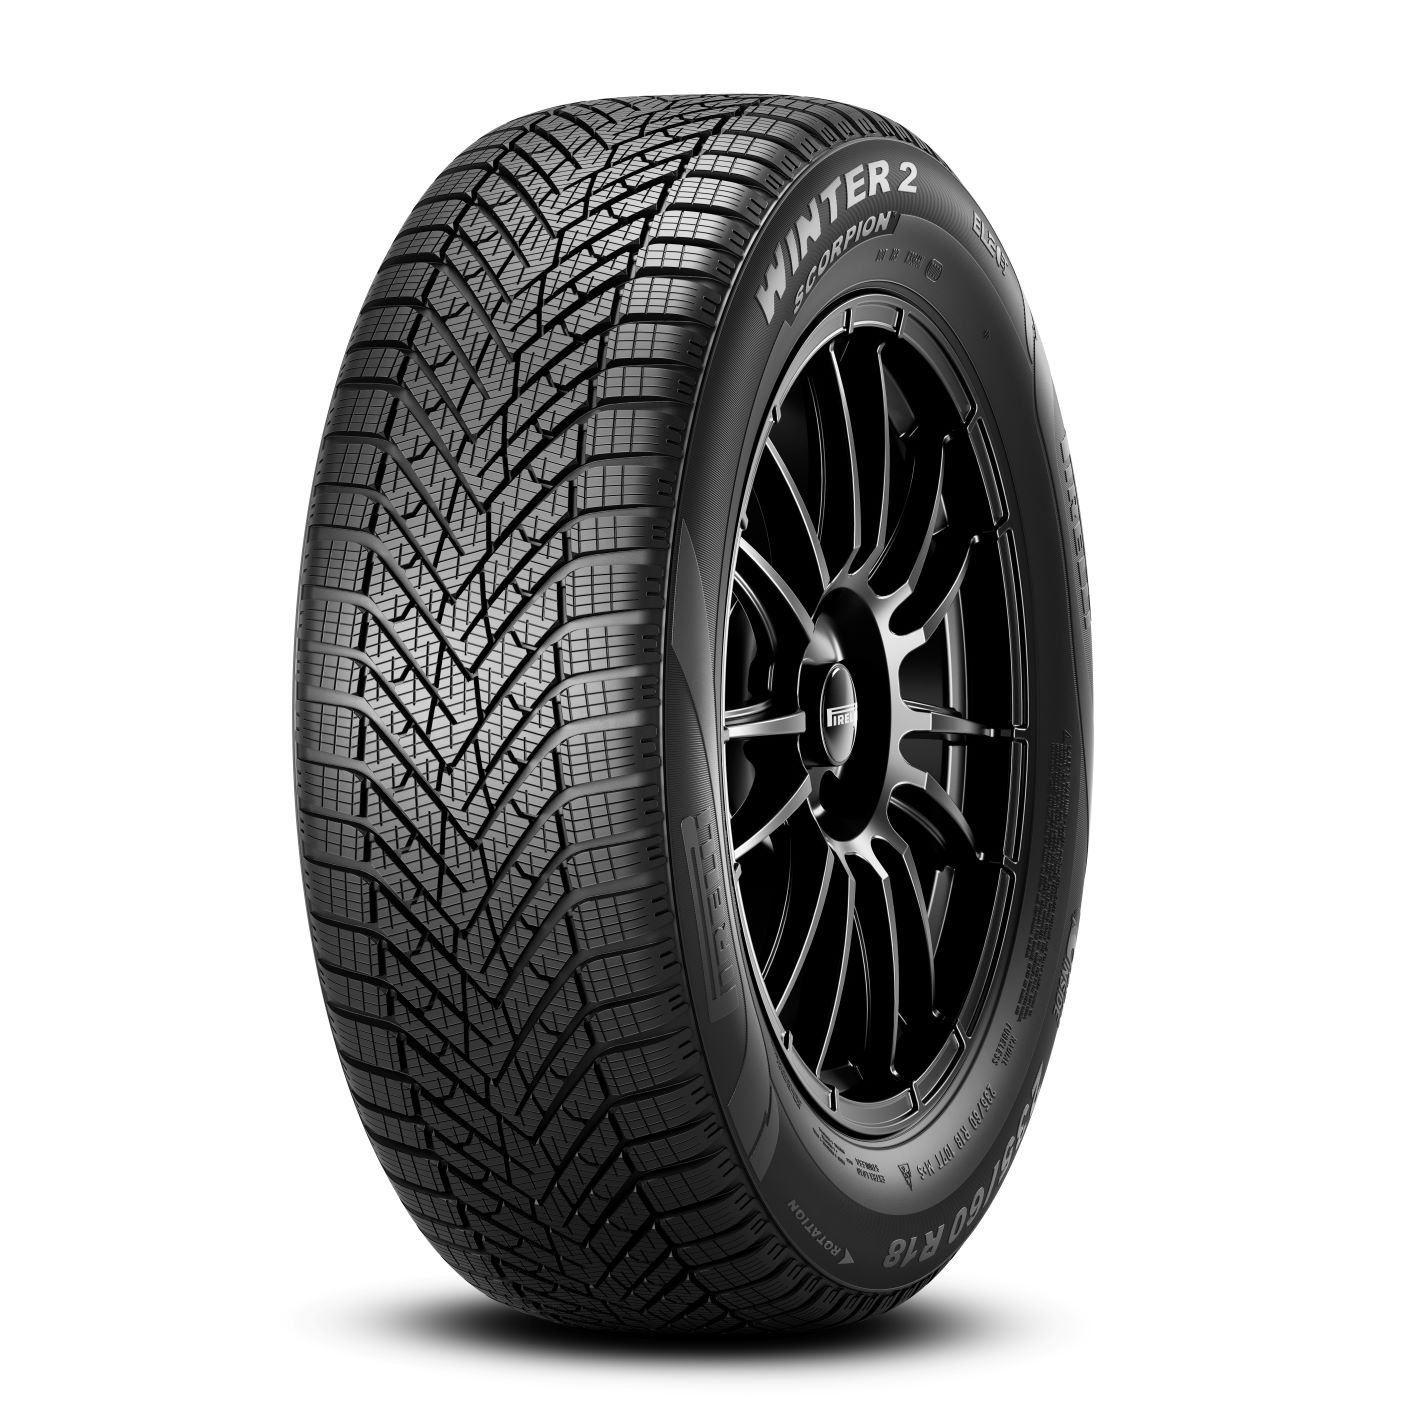 pirelli-scorpion-winter-2-tyre-reviews-and-tests